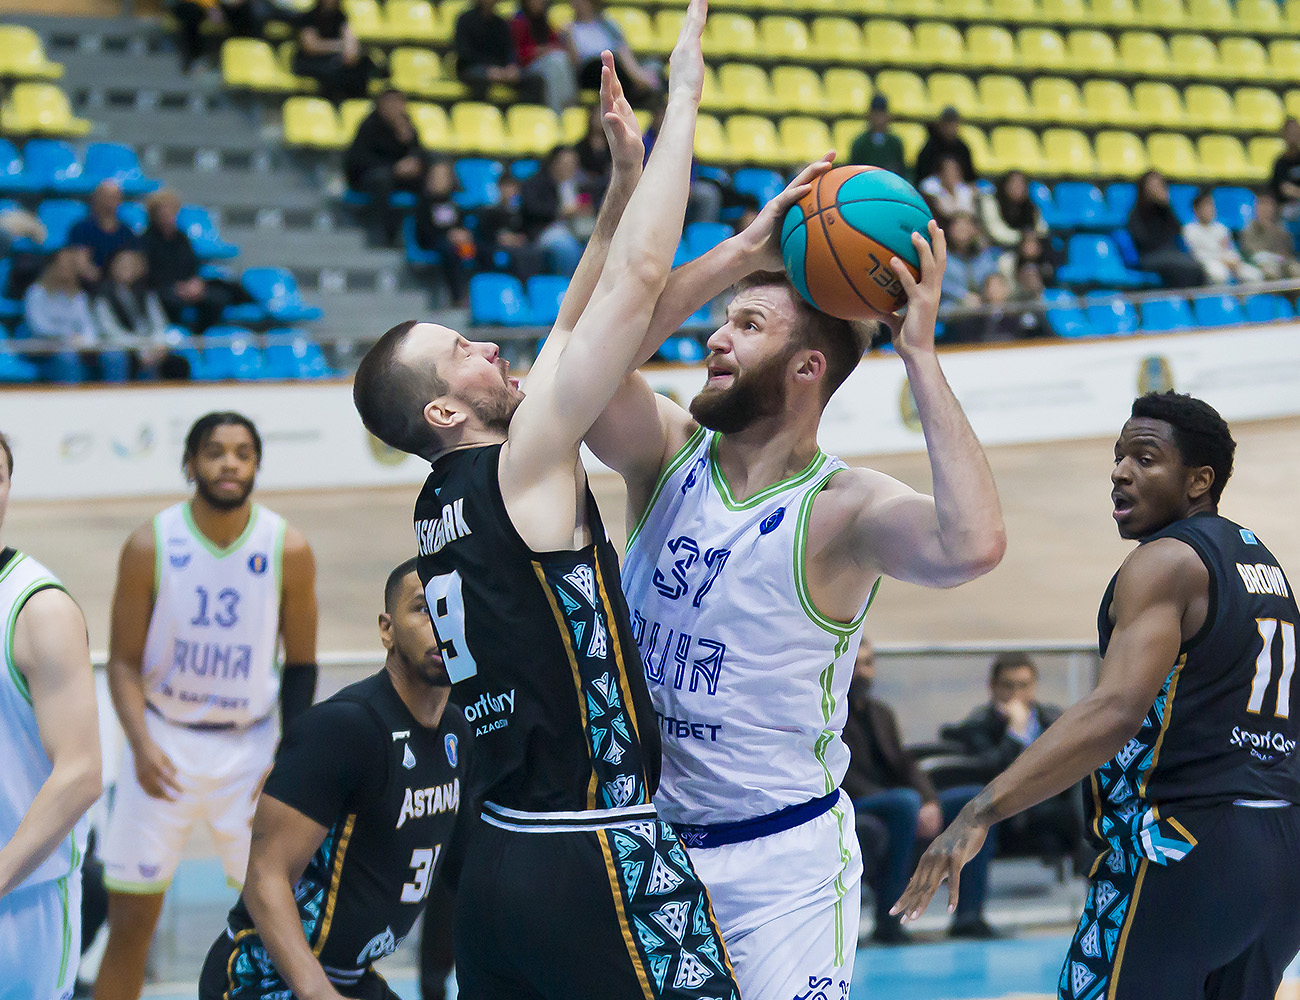 Runa eliminates Astana from the play-in battle